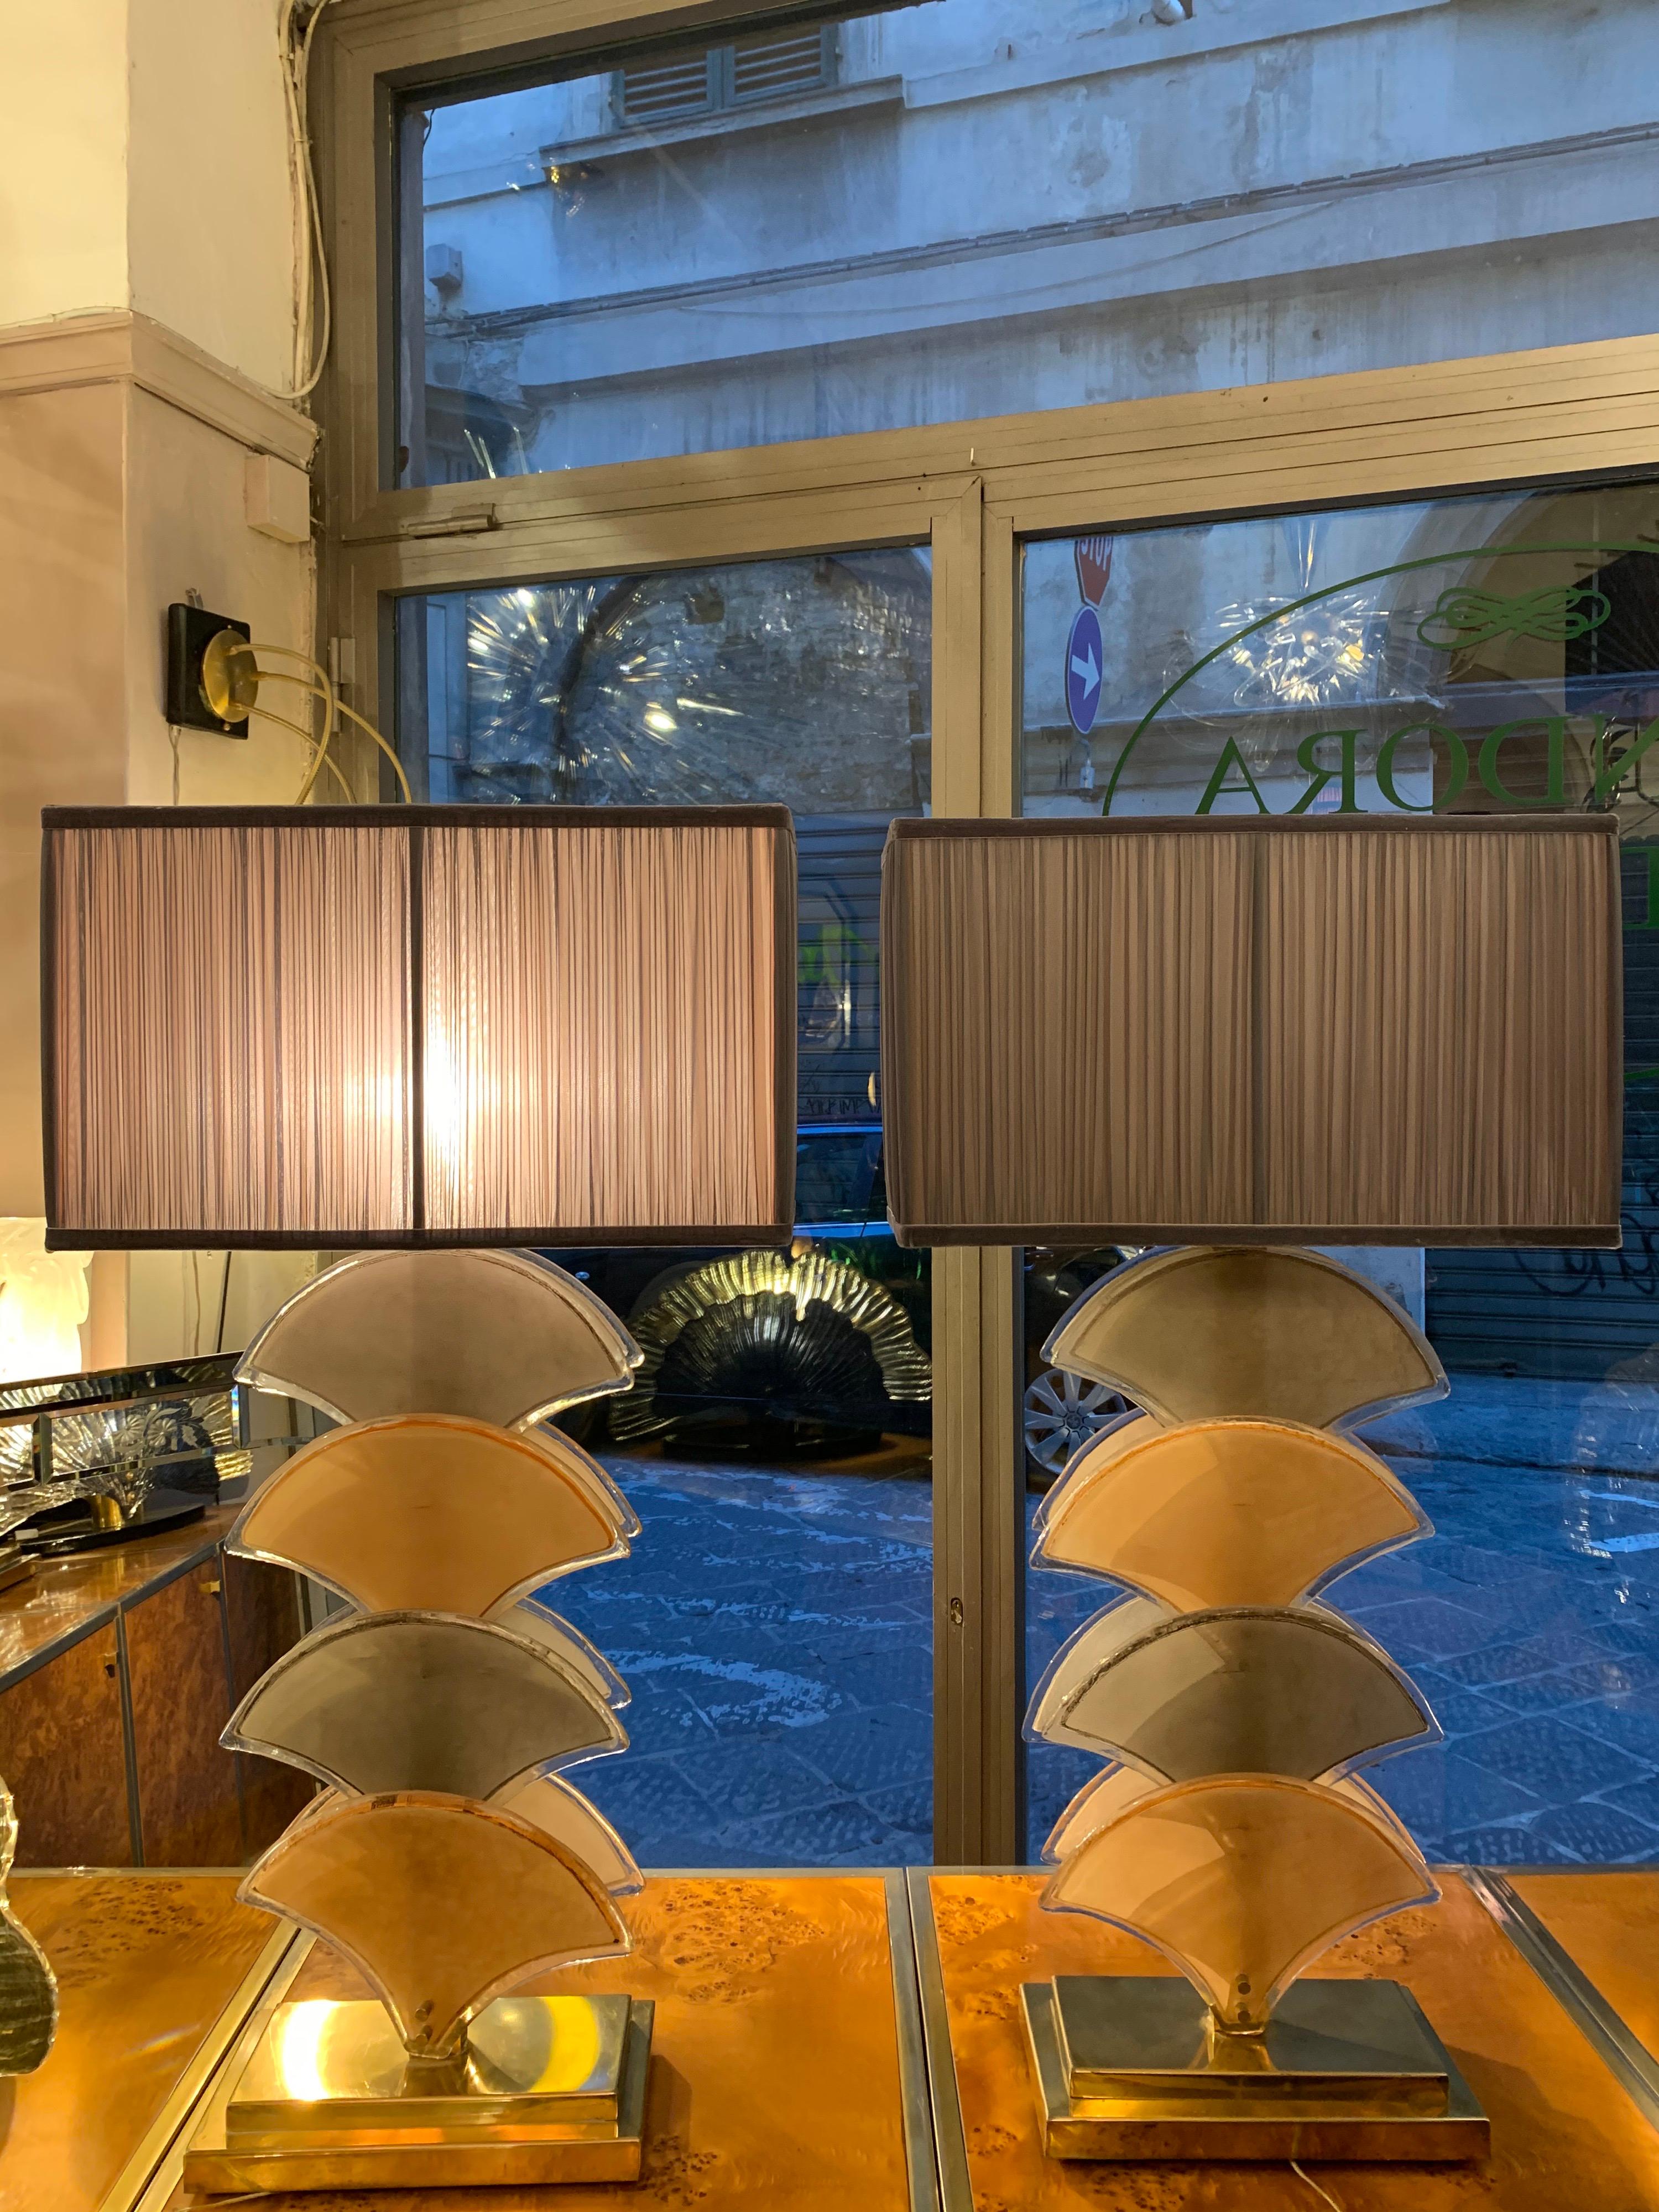 Pair of Art Deco fan-shaped cream and grey Murano glass table lamps, rectangular brass base.

The lampshades are handsewn by us with ruched chiffon double color (grey outside and rose pale inside). There are pictures also with lampshades with grey